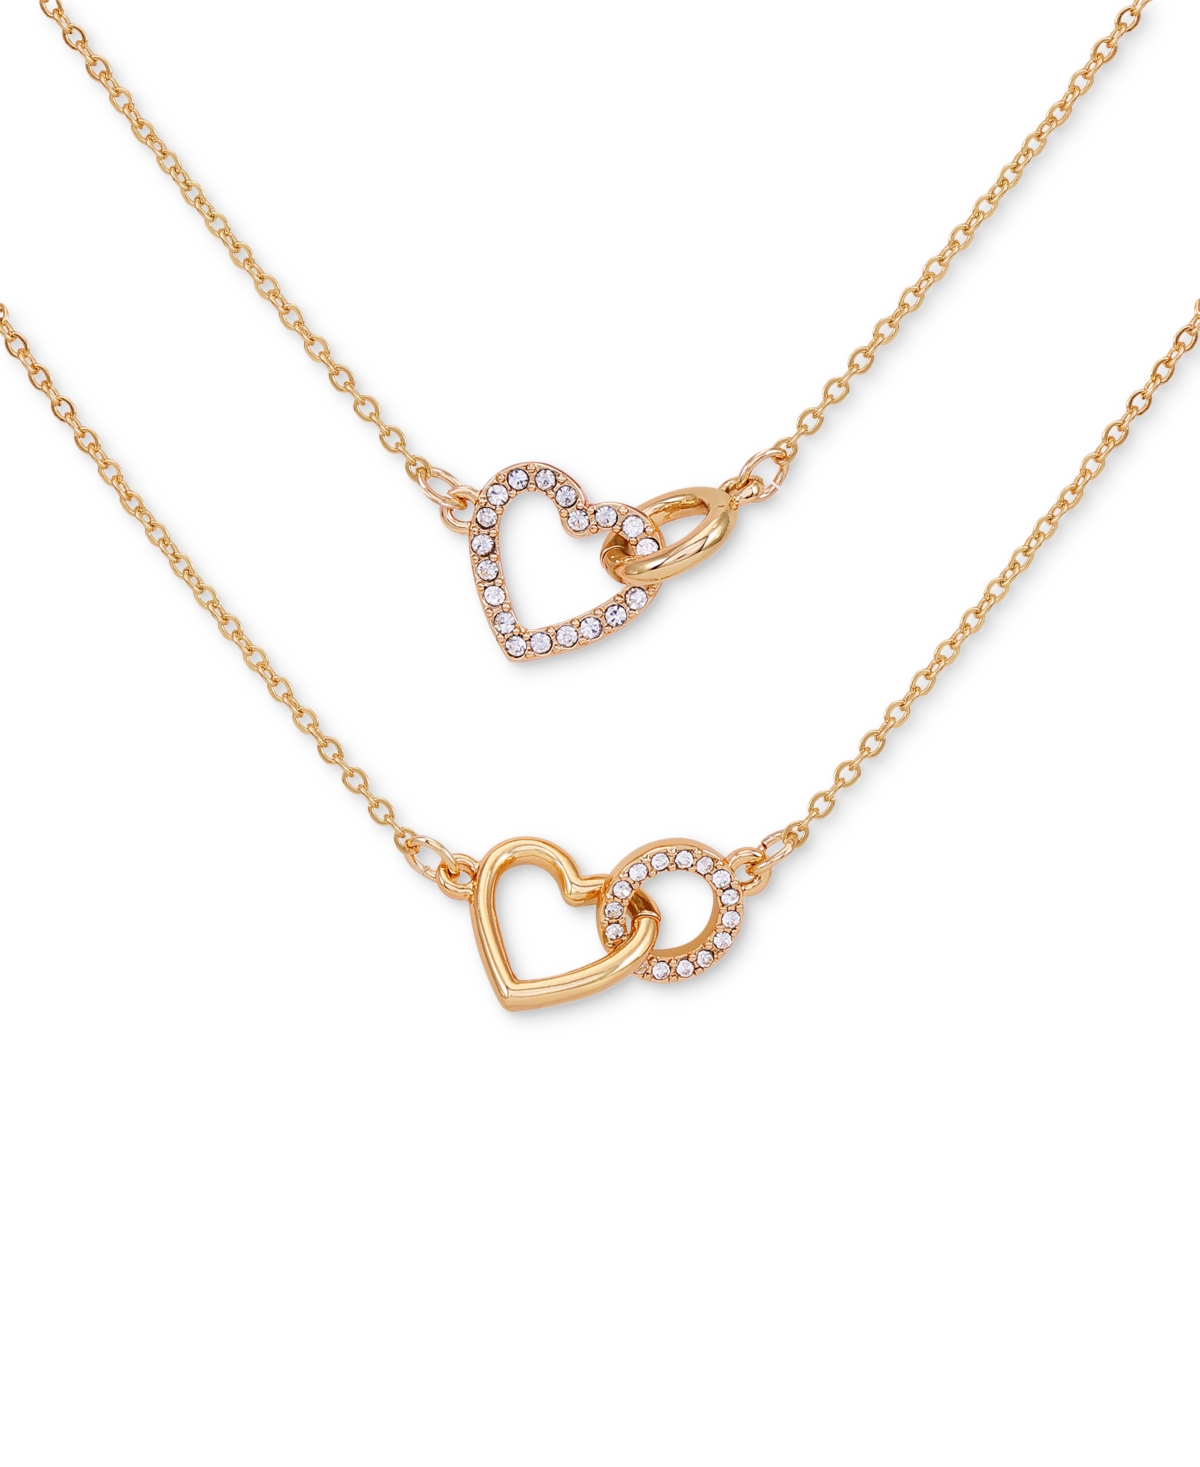 Guess Gold-tone 2-pc. Set Pave Interlocking Heart & Circle Pendant Necklaces, 16" + 2" Extender In Pink